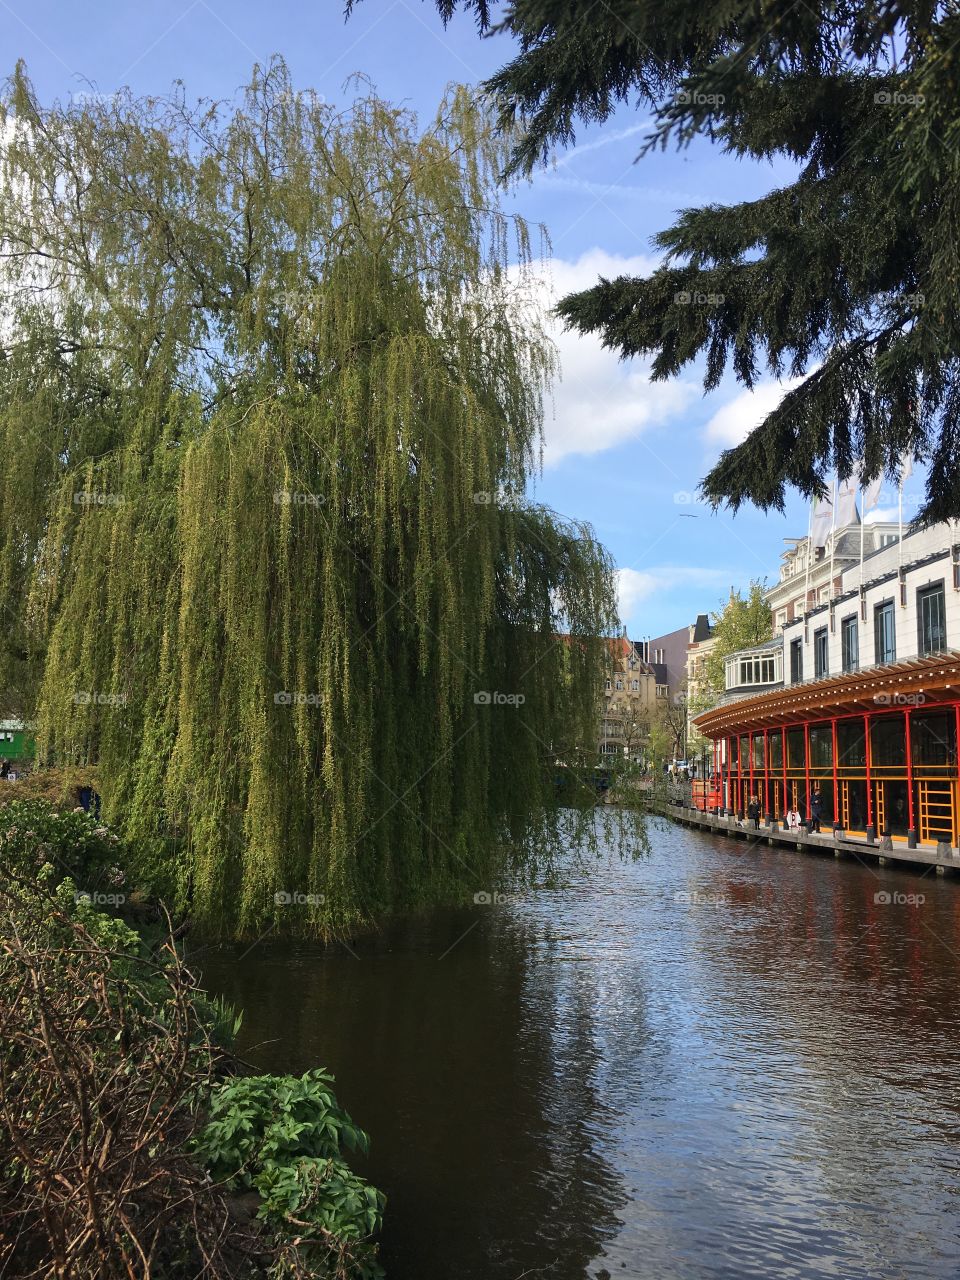 Weeping Willow in Amsterdam 